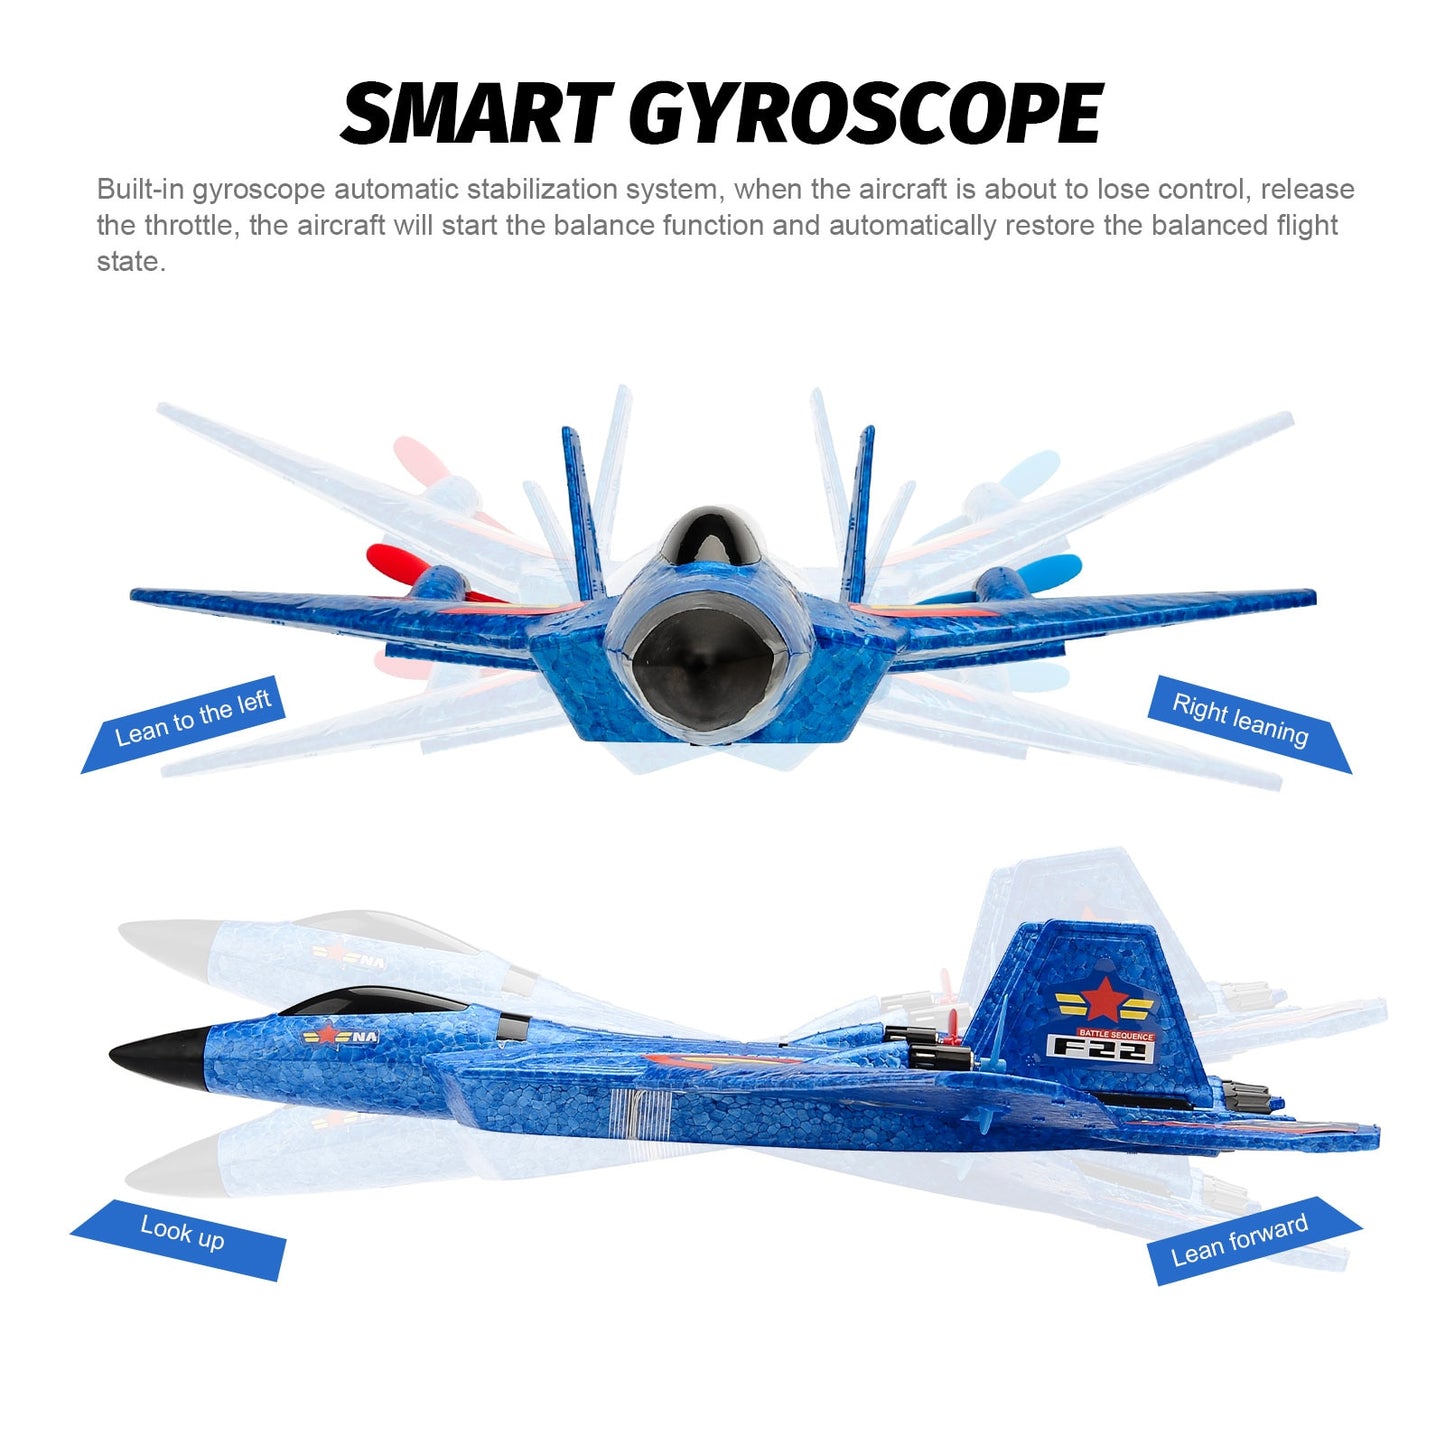 Remote Control F22 Fighter Jet/Airplane